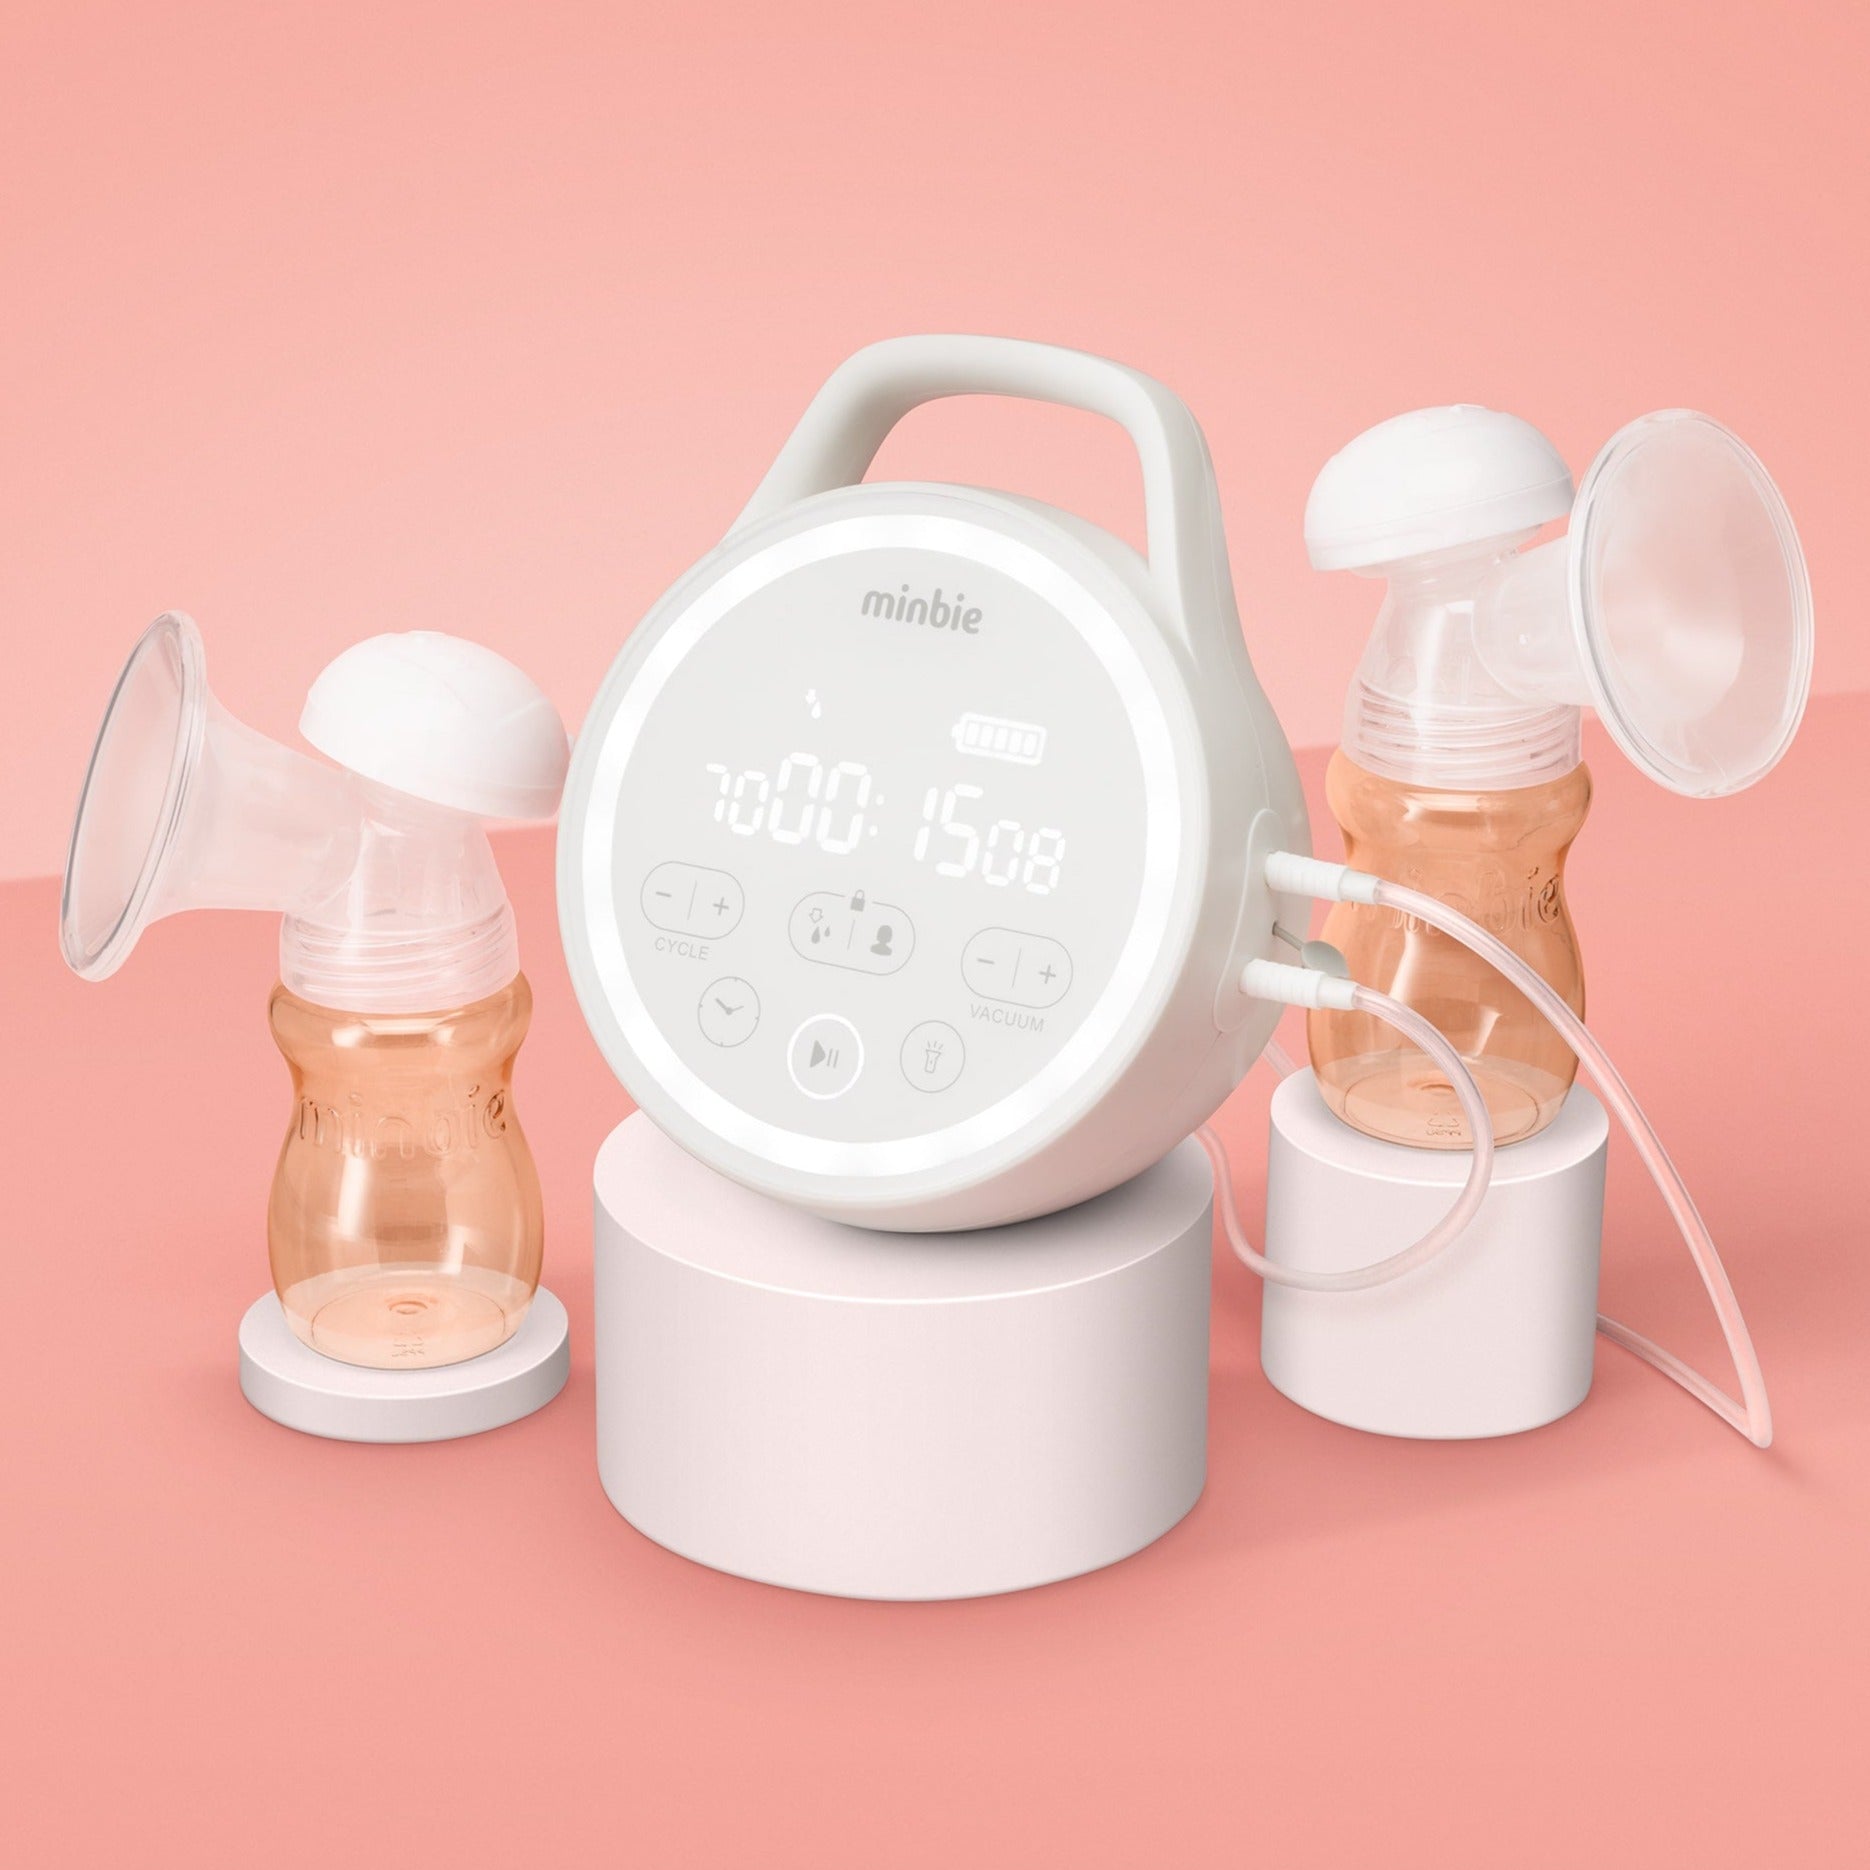 Spectra S1 Review: A Nearly-Perfect Breast Pump